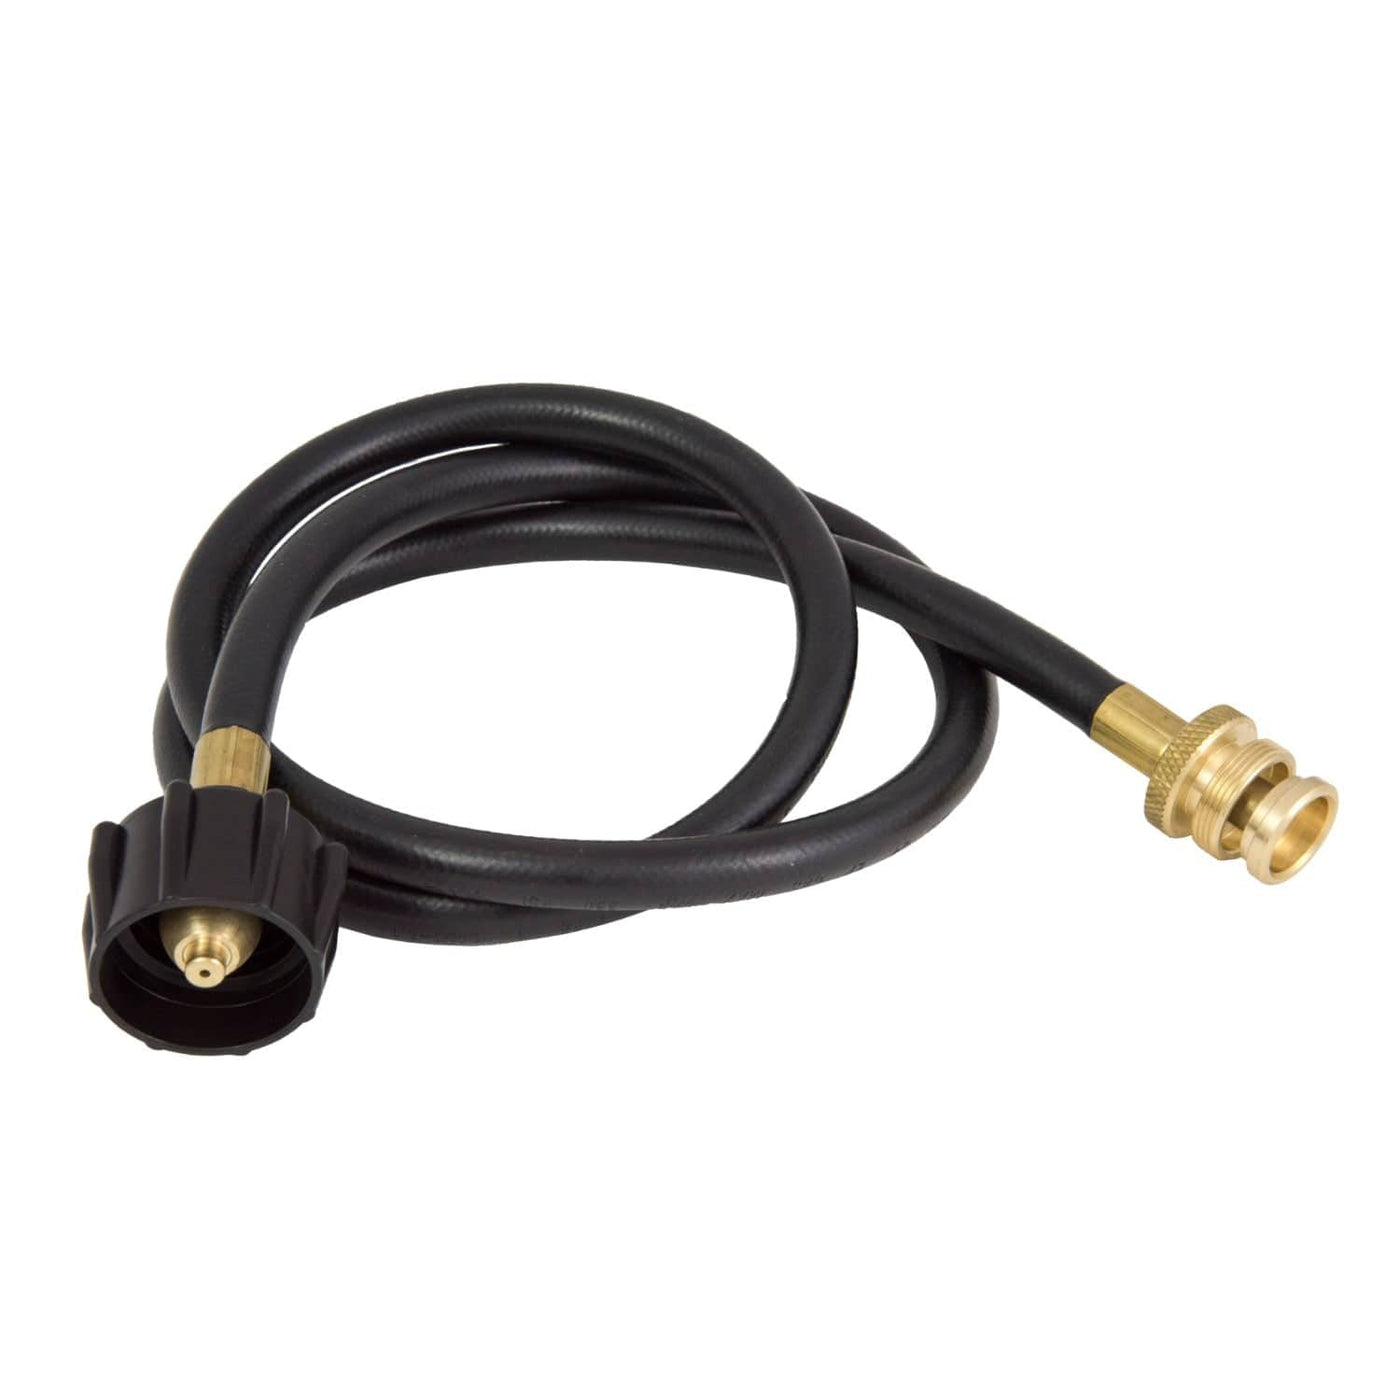 Char-Broil Char-Broil Universal 4 Foot Hose and Adapter Camping And Outdoor